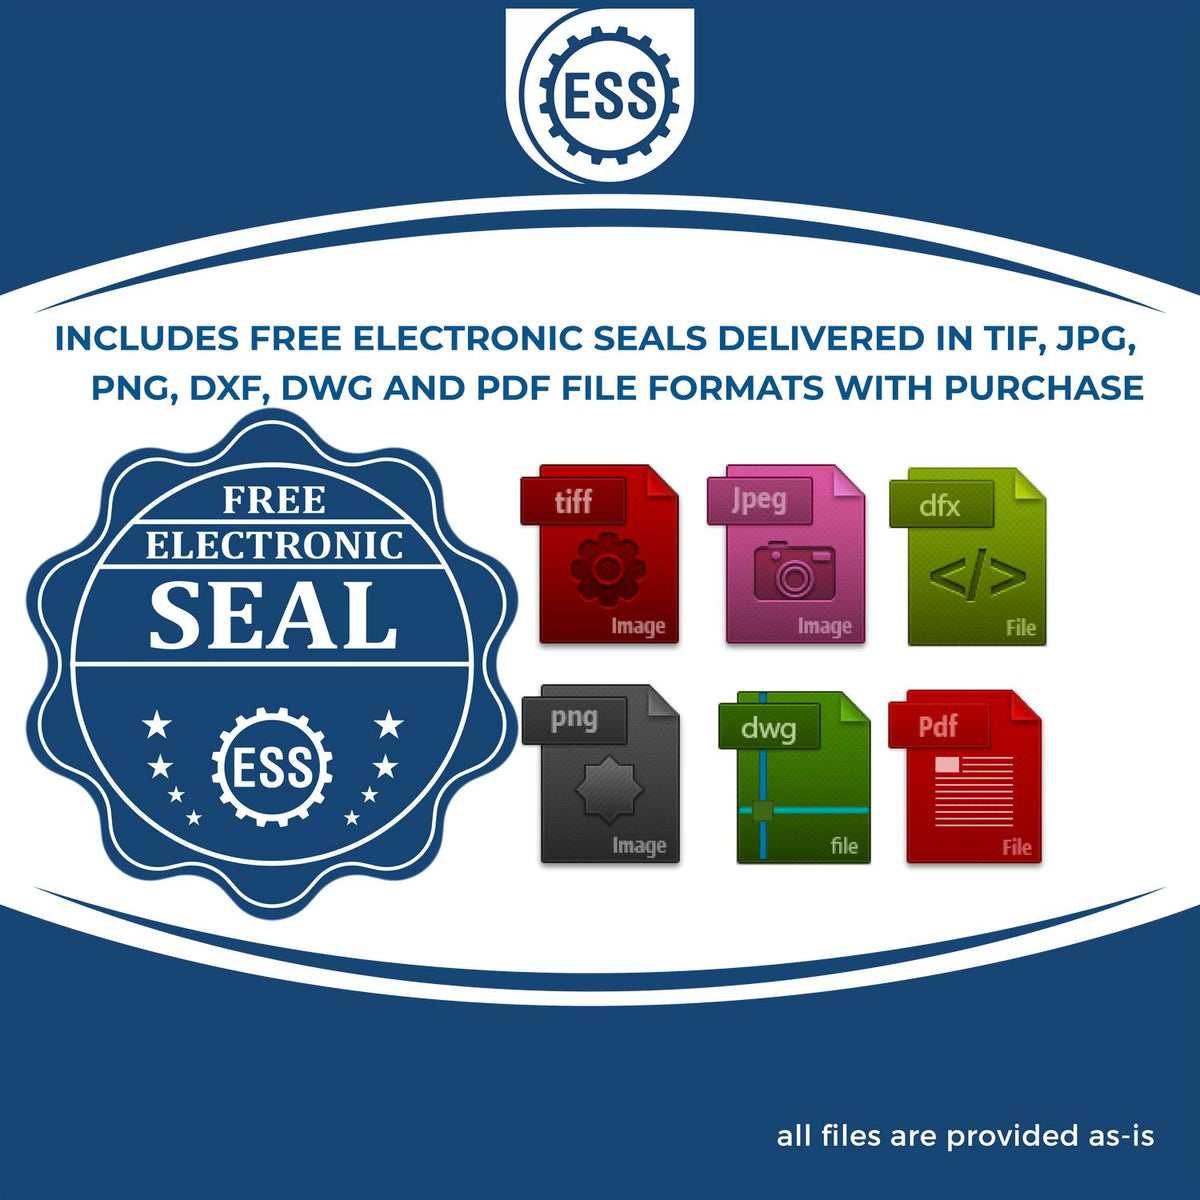 An infographic for the free electronic seal for the Heavy Duty Cast Iron Guam Engineer Seal Embosser illustrating the different file type icons such as DXF, DWG, TIF, JPG and PNG.